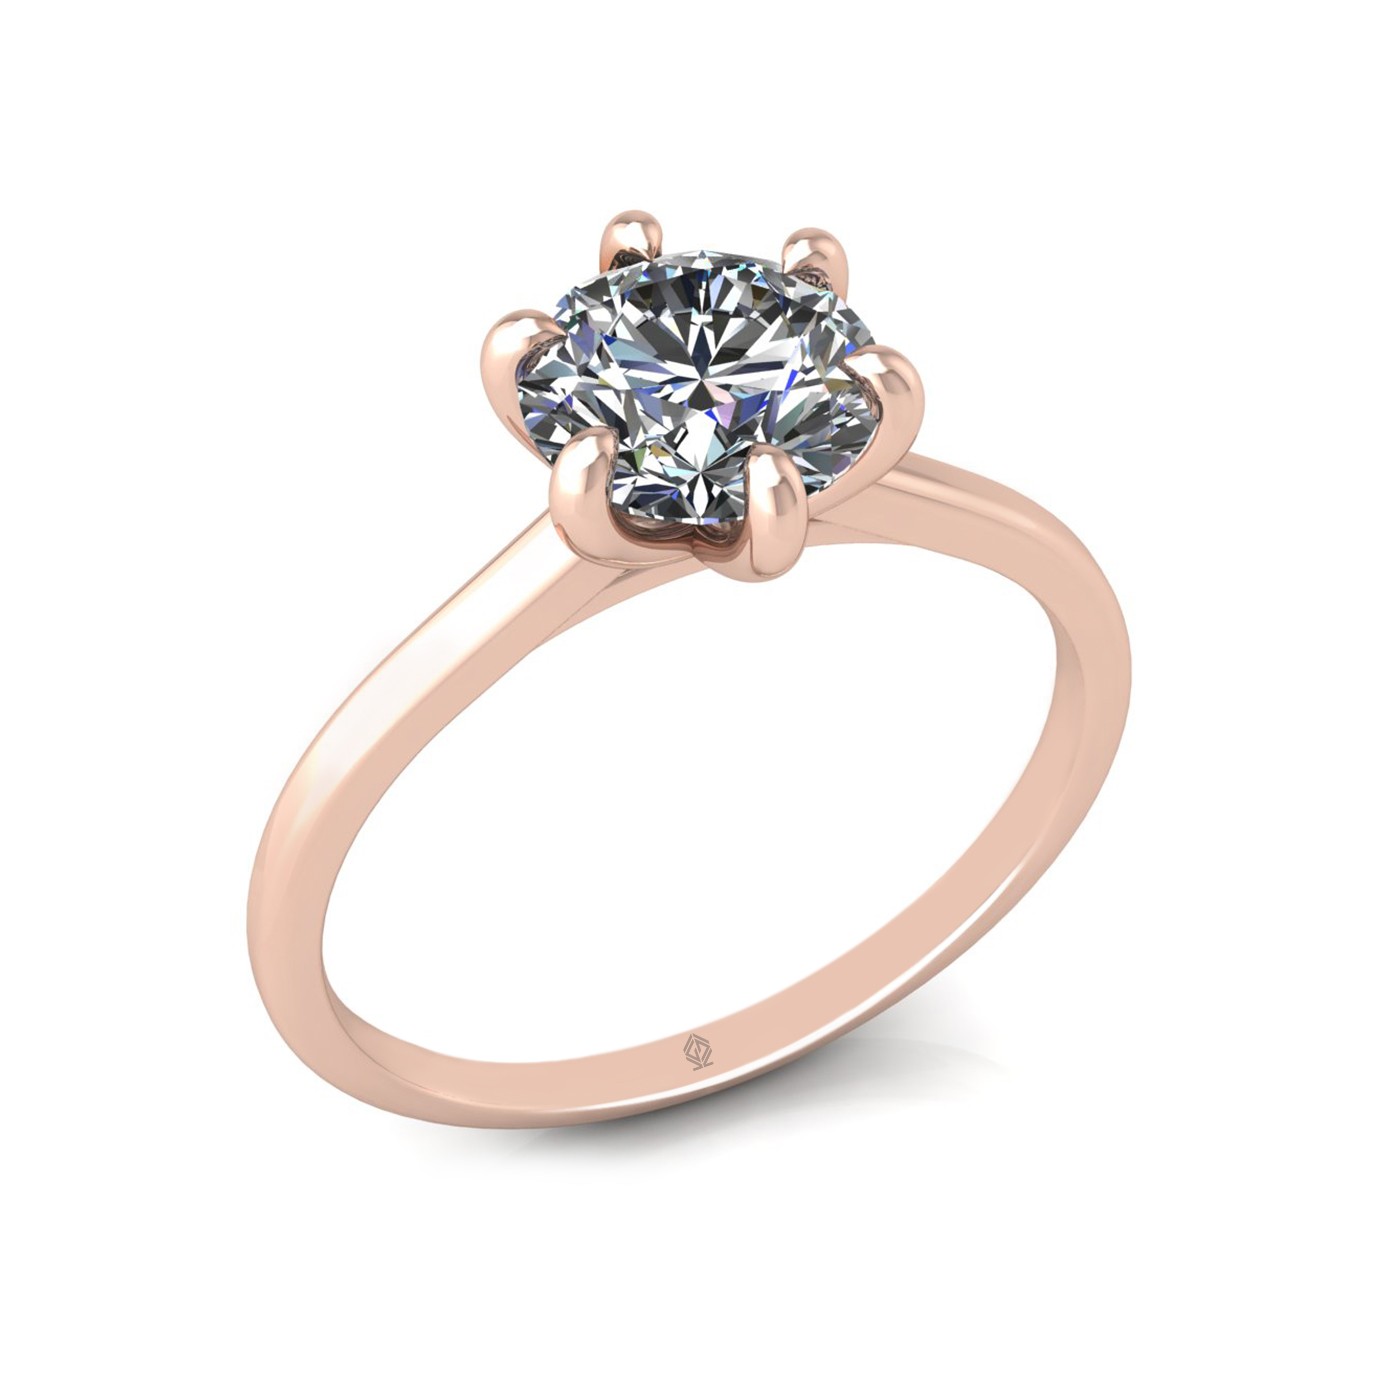 18k rose gold 1,20 ct 6 prongs solitaire round cut diamond engagement ring with whisper thin band